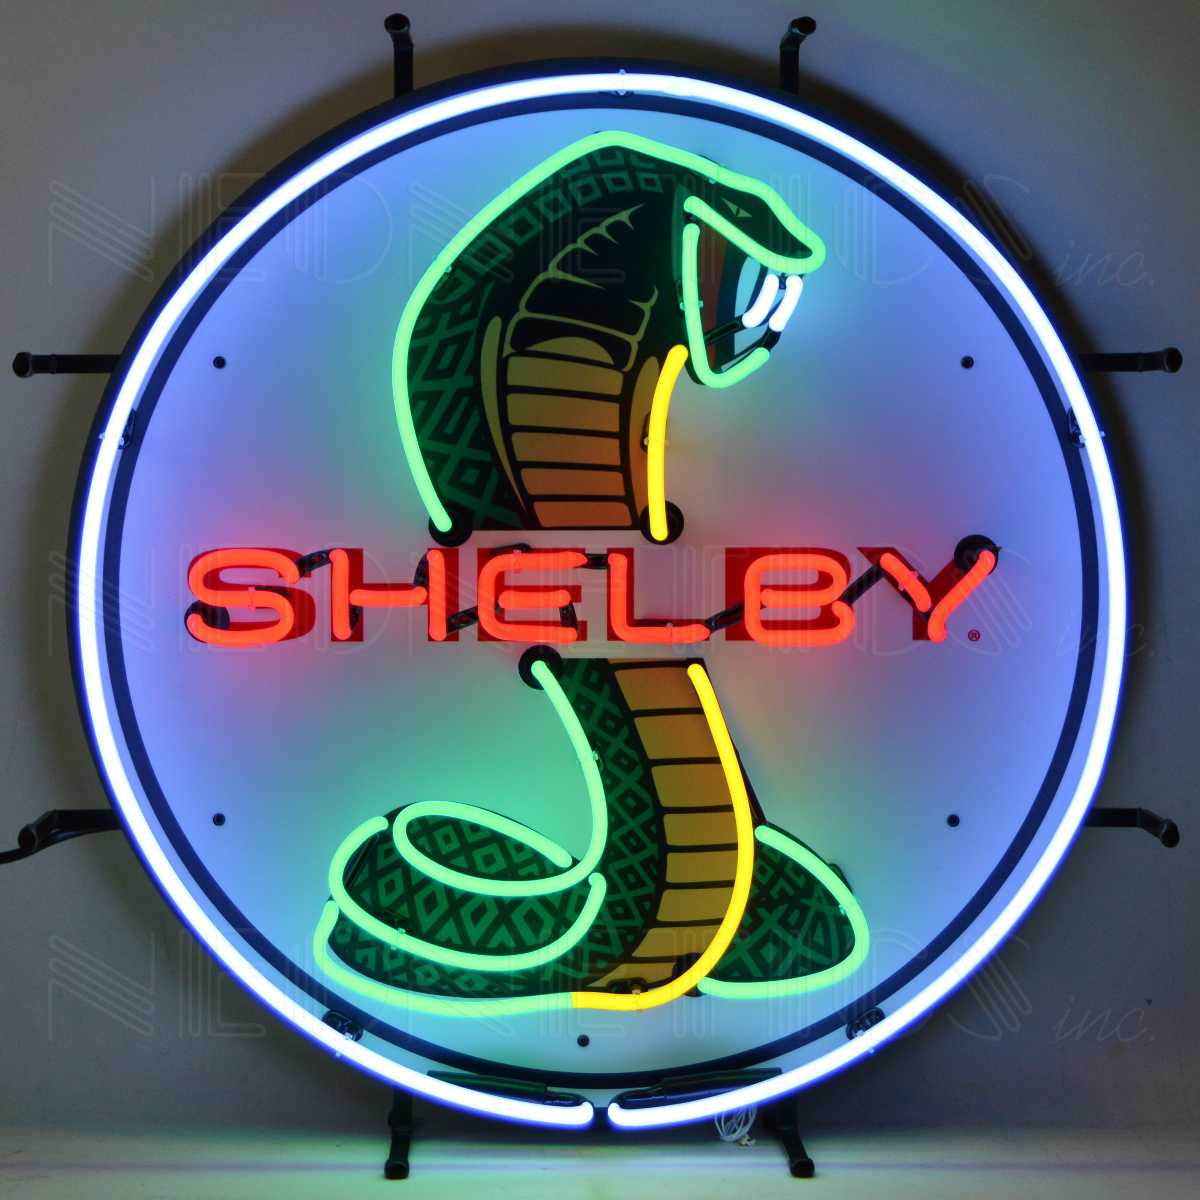 SHELBY COBRA CIRCLE NEON SIGN WITH BACKING